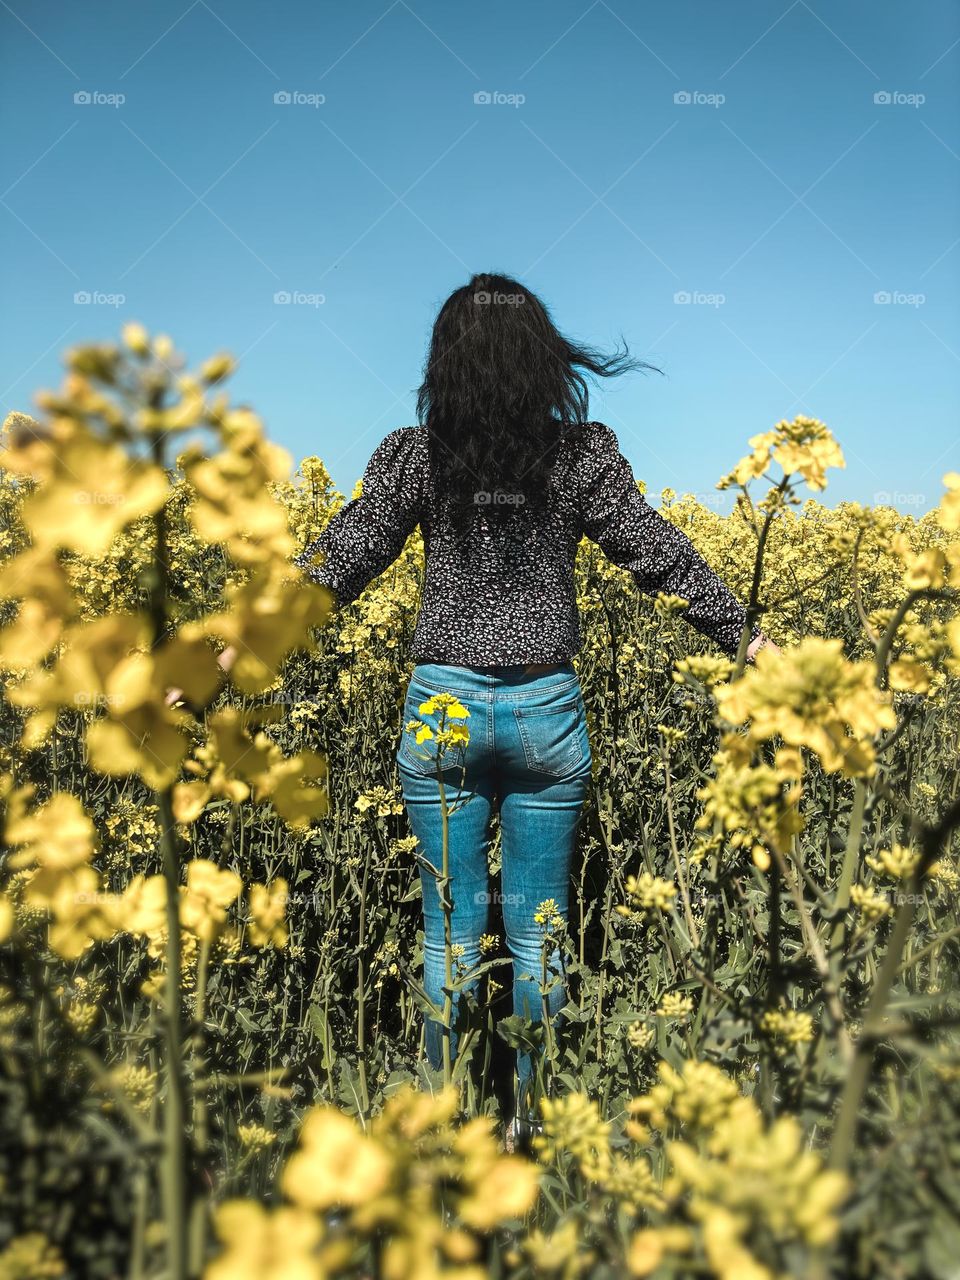 In the middle of a blooming canola field 